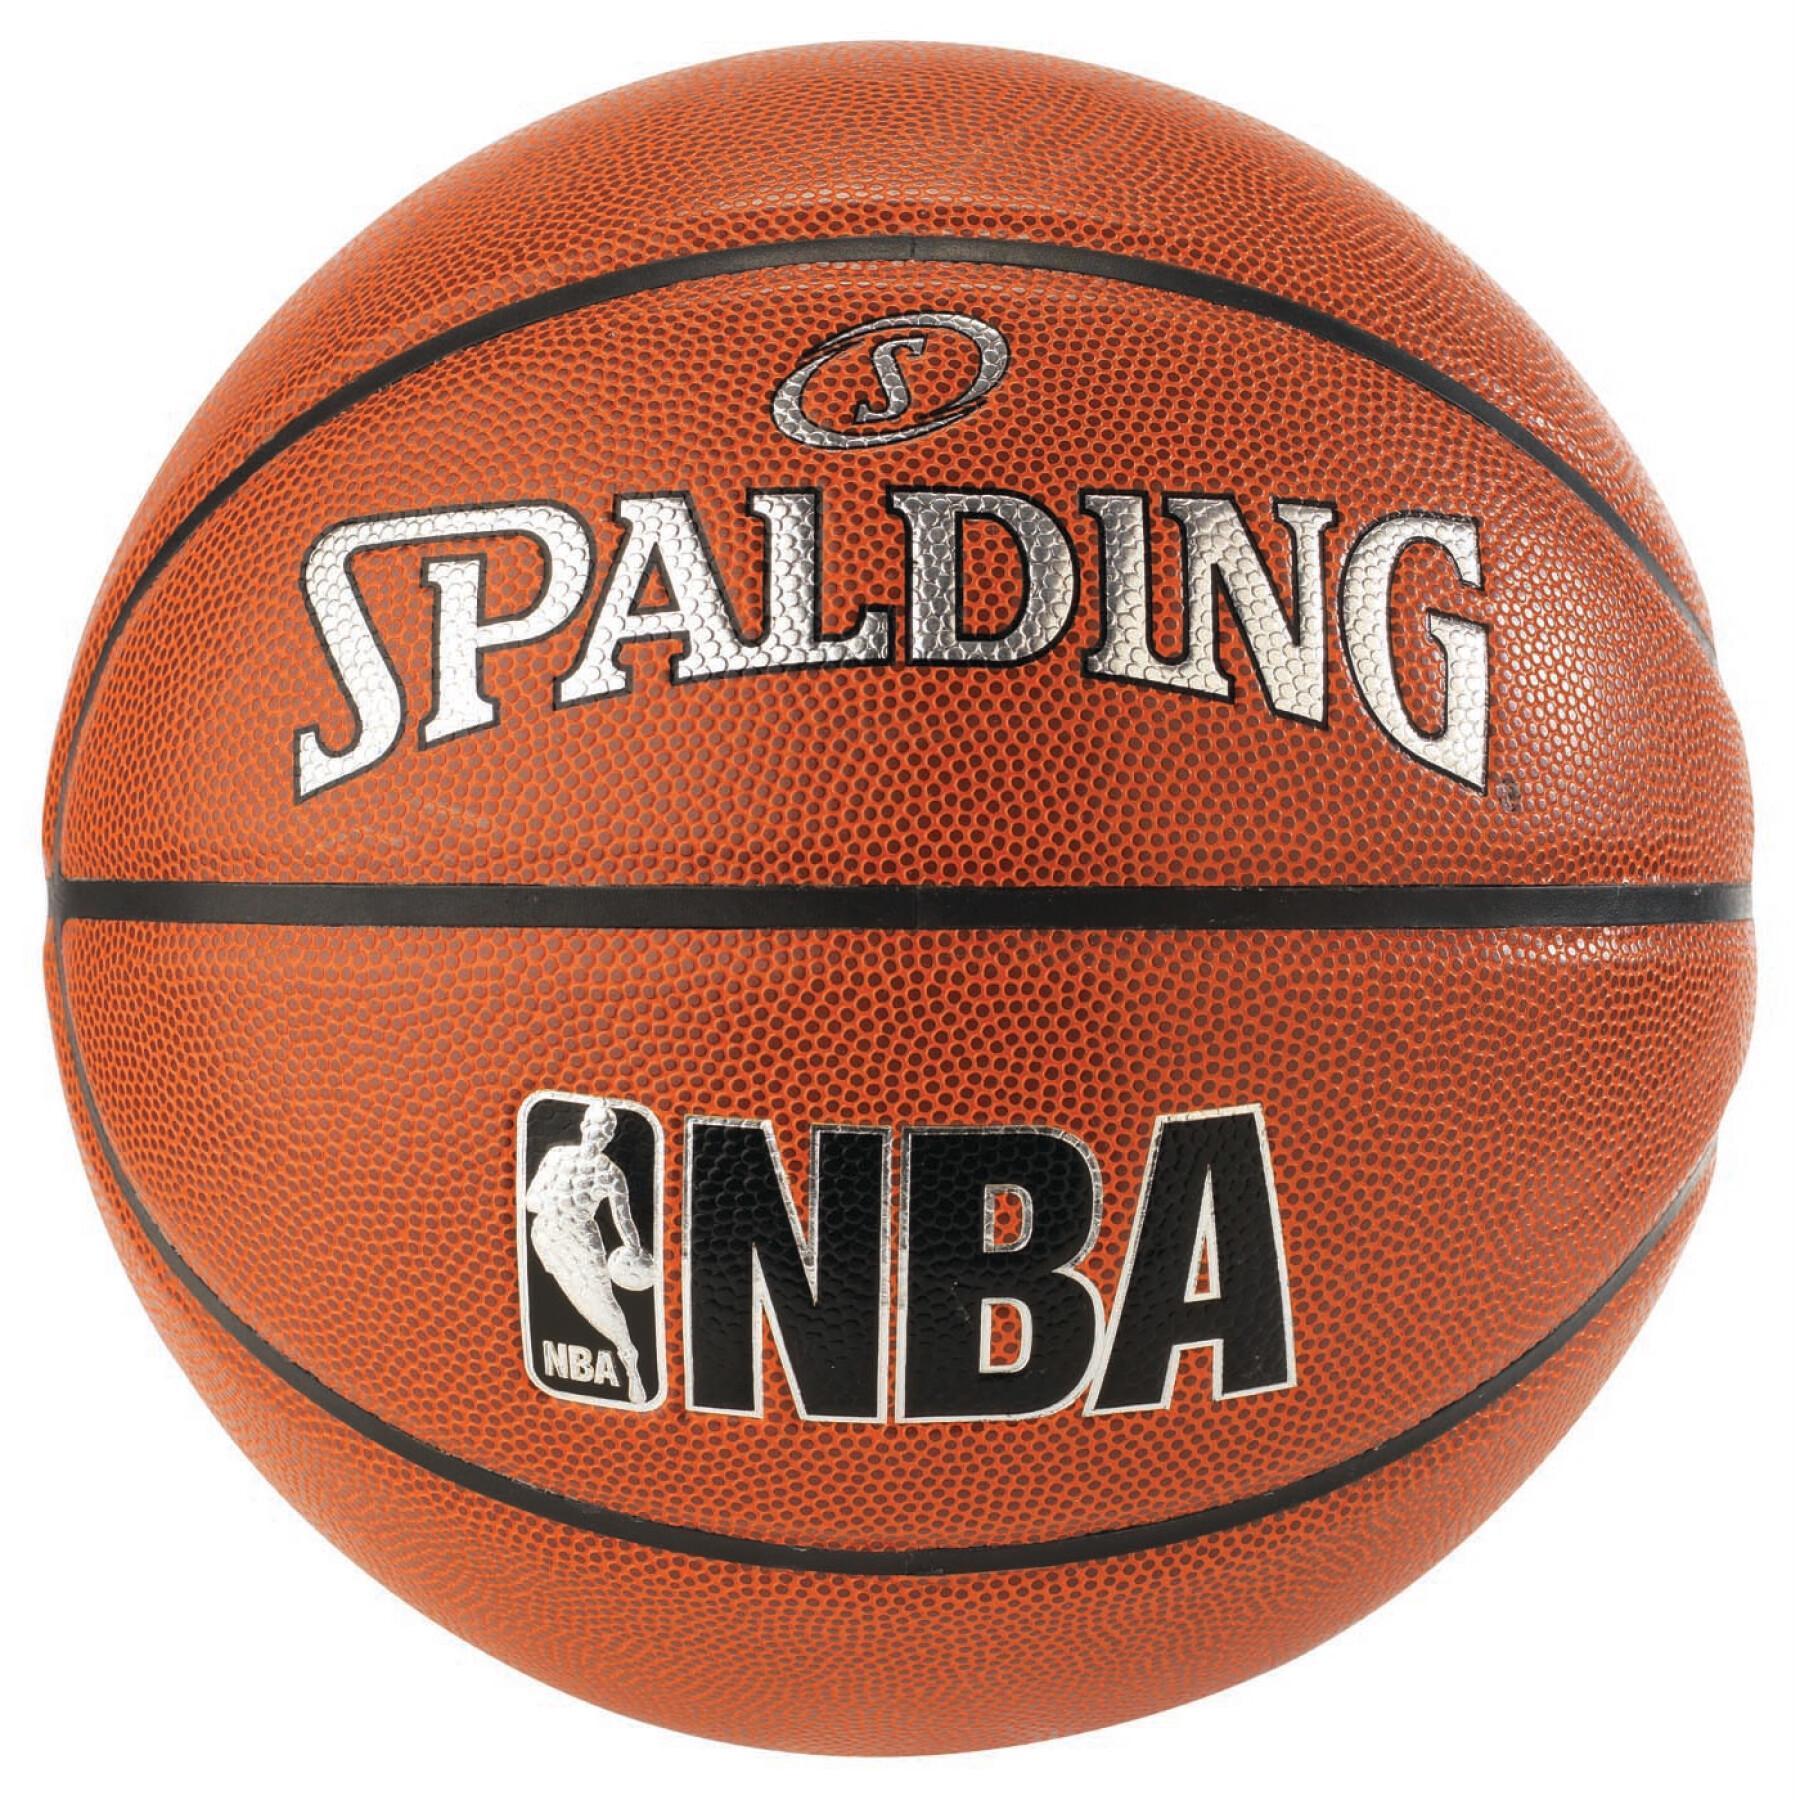 Kinderbal Spalding NBA In/Out